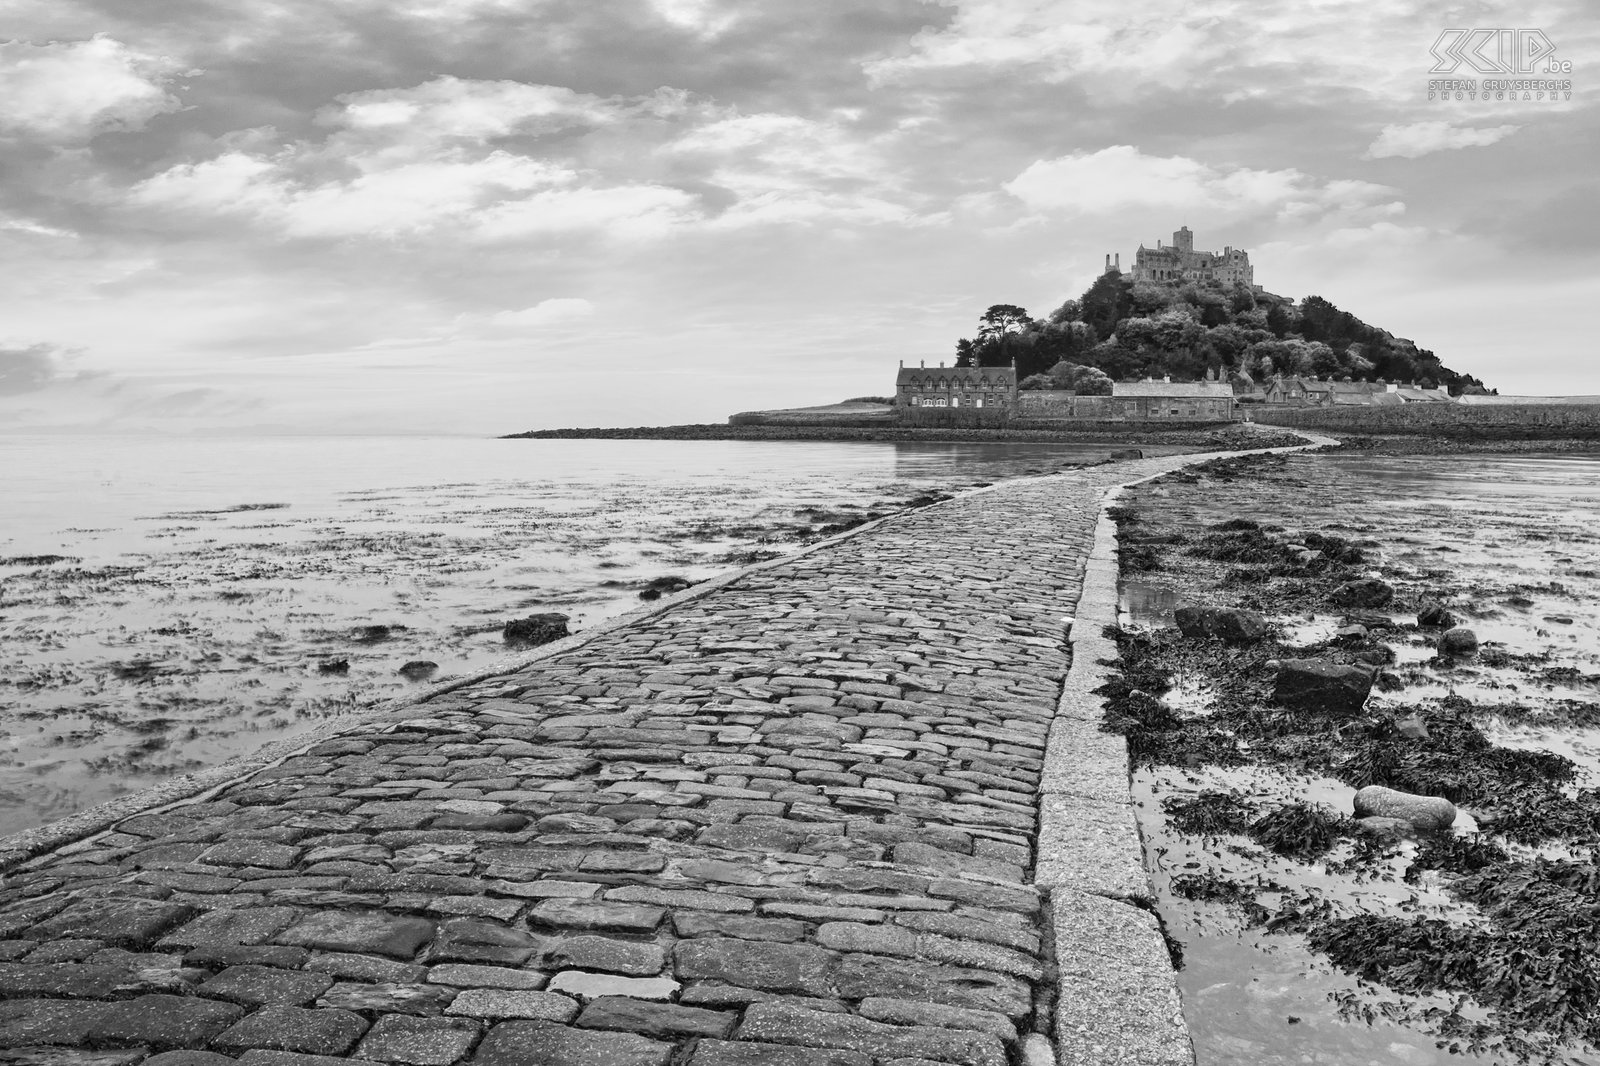 St Michael's Mount St. Michael's Mount is a tidal island near Marazion with a castle and chapel from the 15th century. The causeway of granite setts is passable between mid-tide and low water. Stefan Cruysberghs